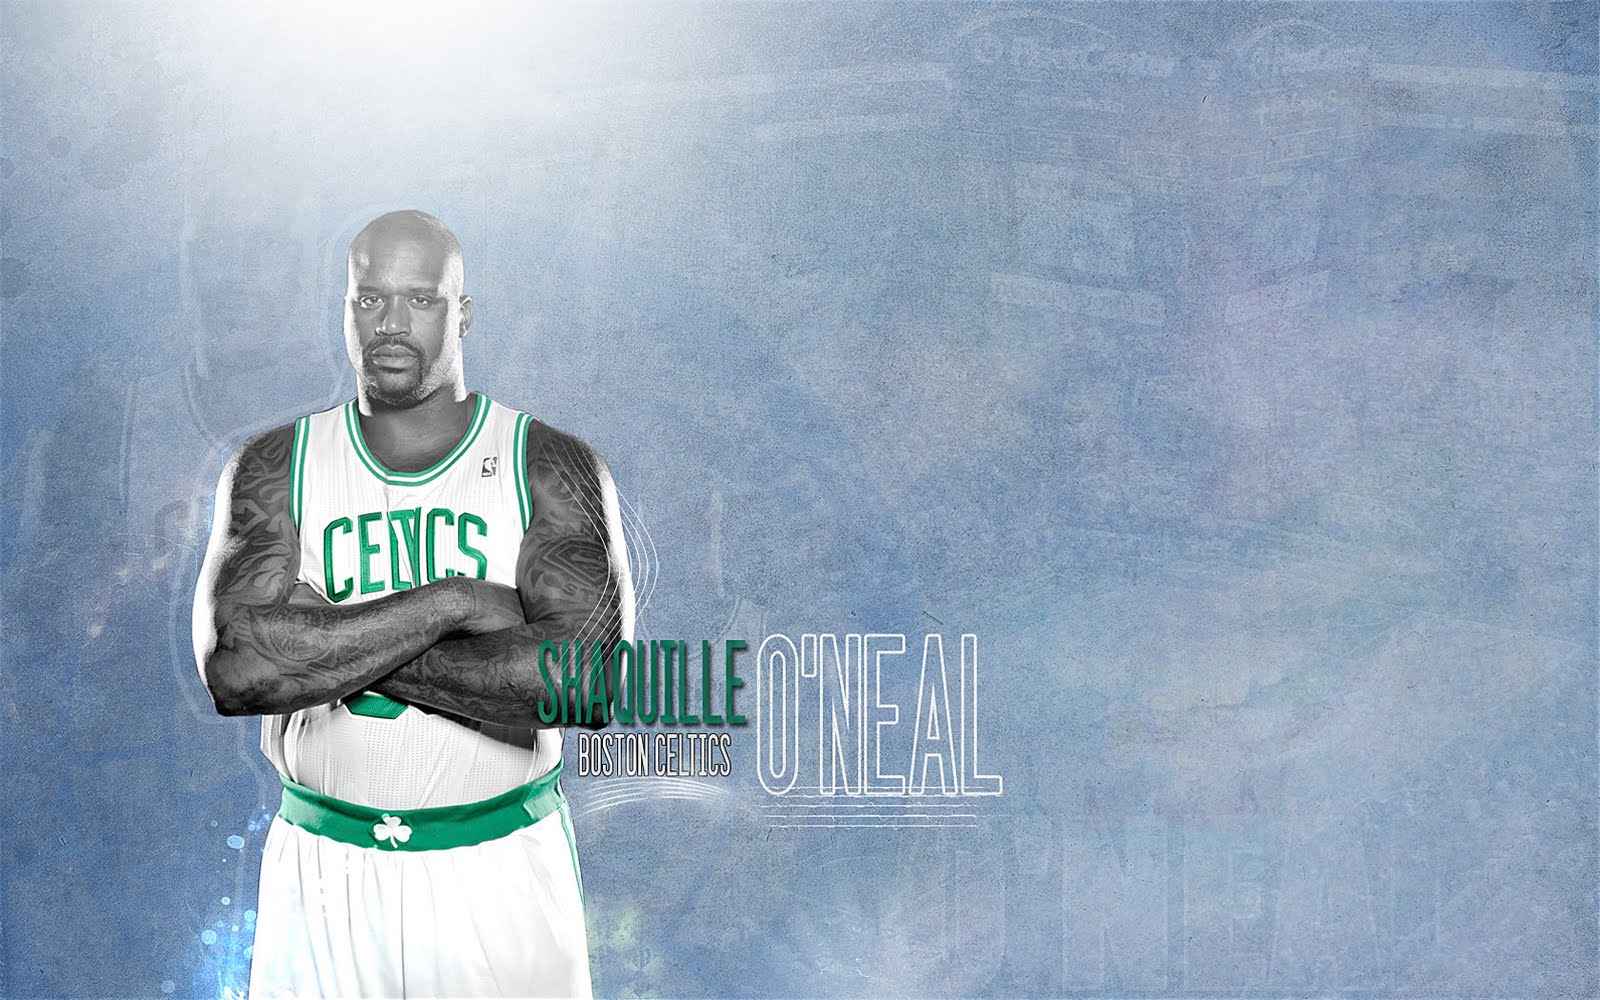 Shaquille O'Neal Professional Basketball Player : Basketball Legend Wallpapers ...